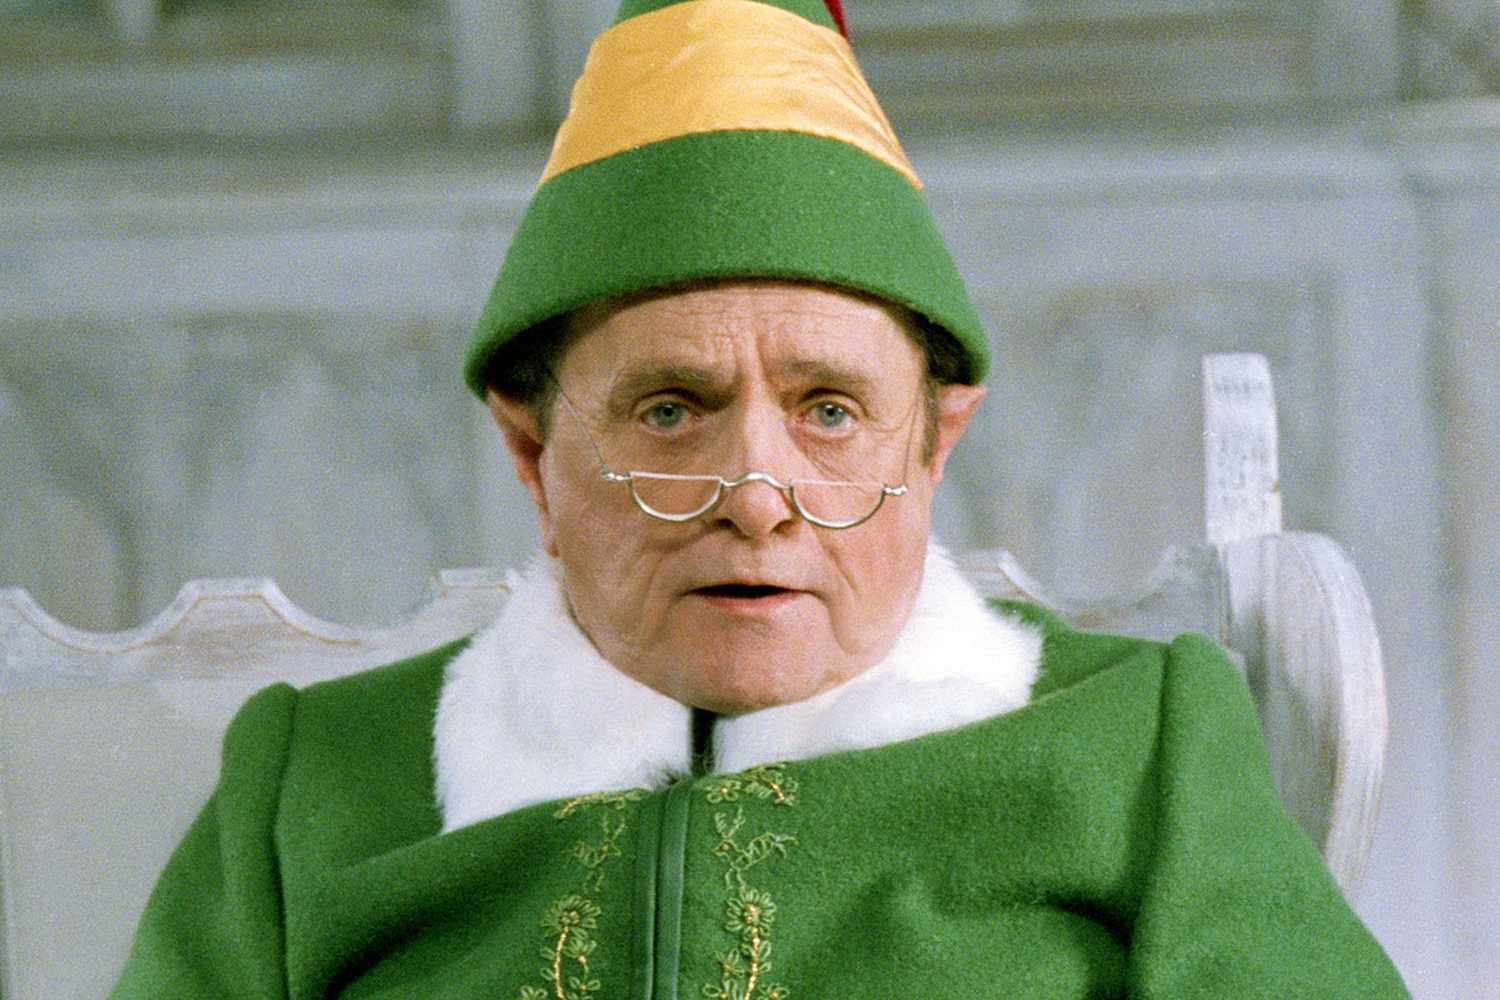 Late comedy icon Bob Newhart said his 'Elf' role outranked all the others